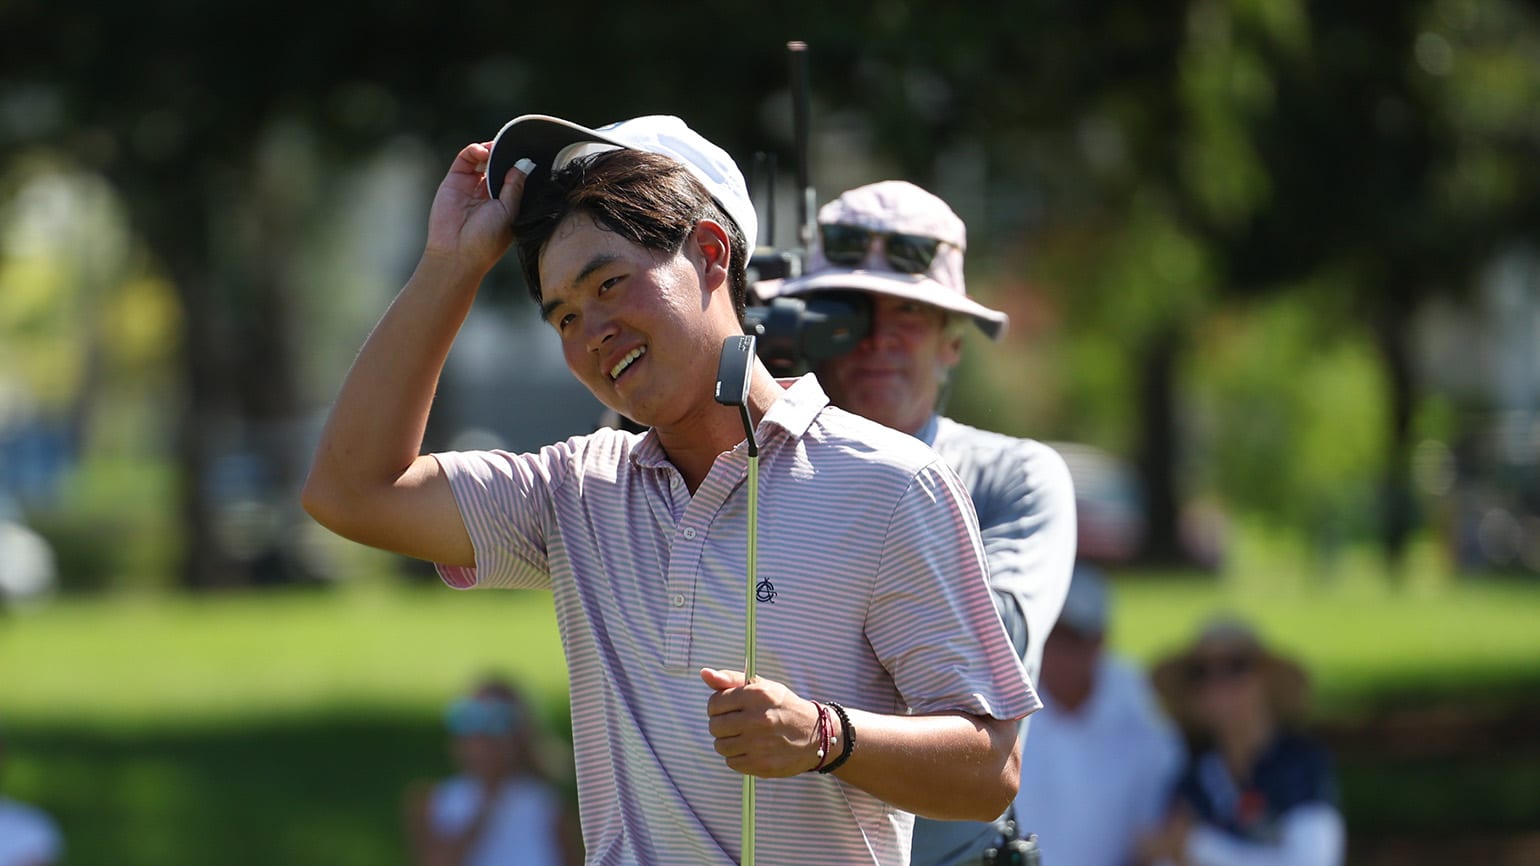 Bryan Kim played the equivalent of 7-under-par golf over the 36 holes of the weather-delayed final to claim the U.S. Junior Amateur title. (USGA/Tom Brenner)